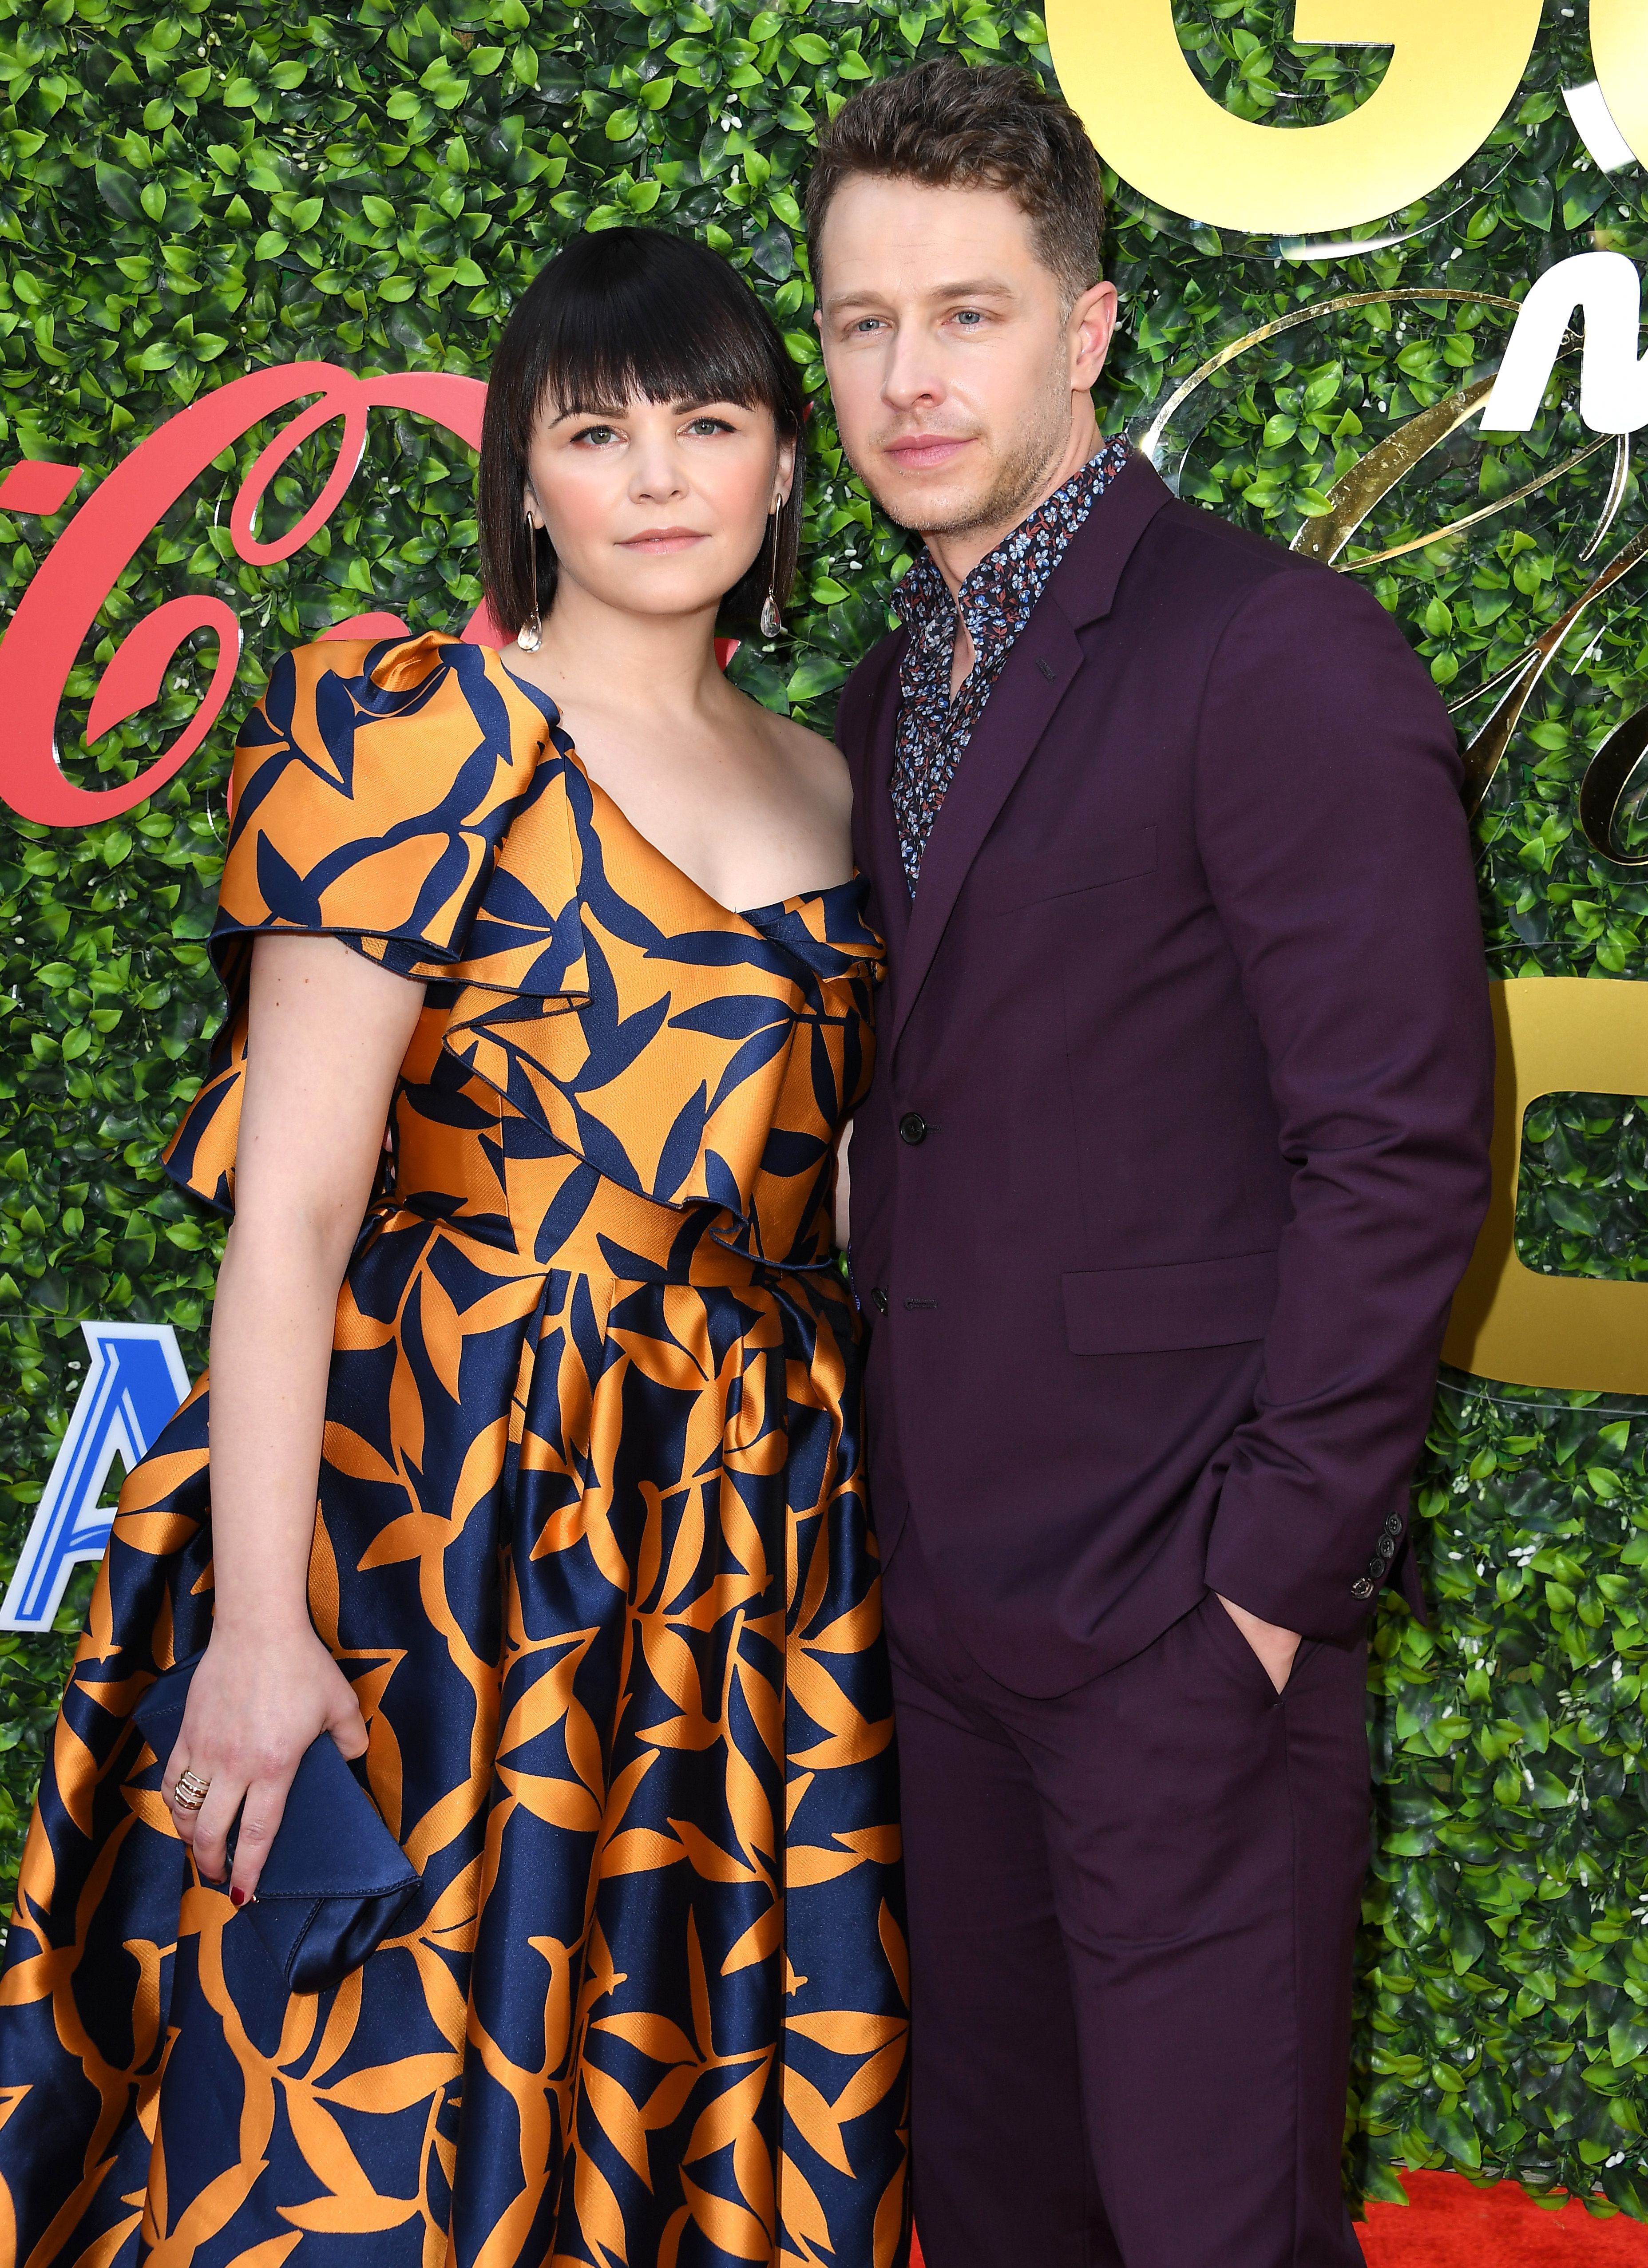 Ginnifer Goodwin and Josh Dallas at the 7th Annual Gold Meets Golden in 2020 in Los Angeles, California | Source: Getty Images